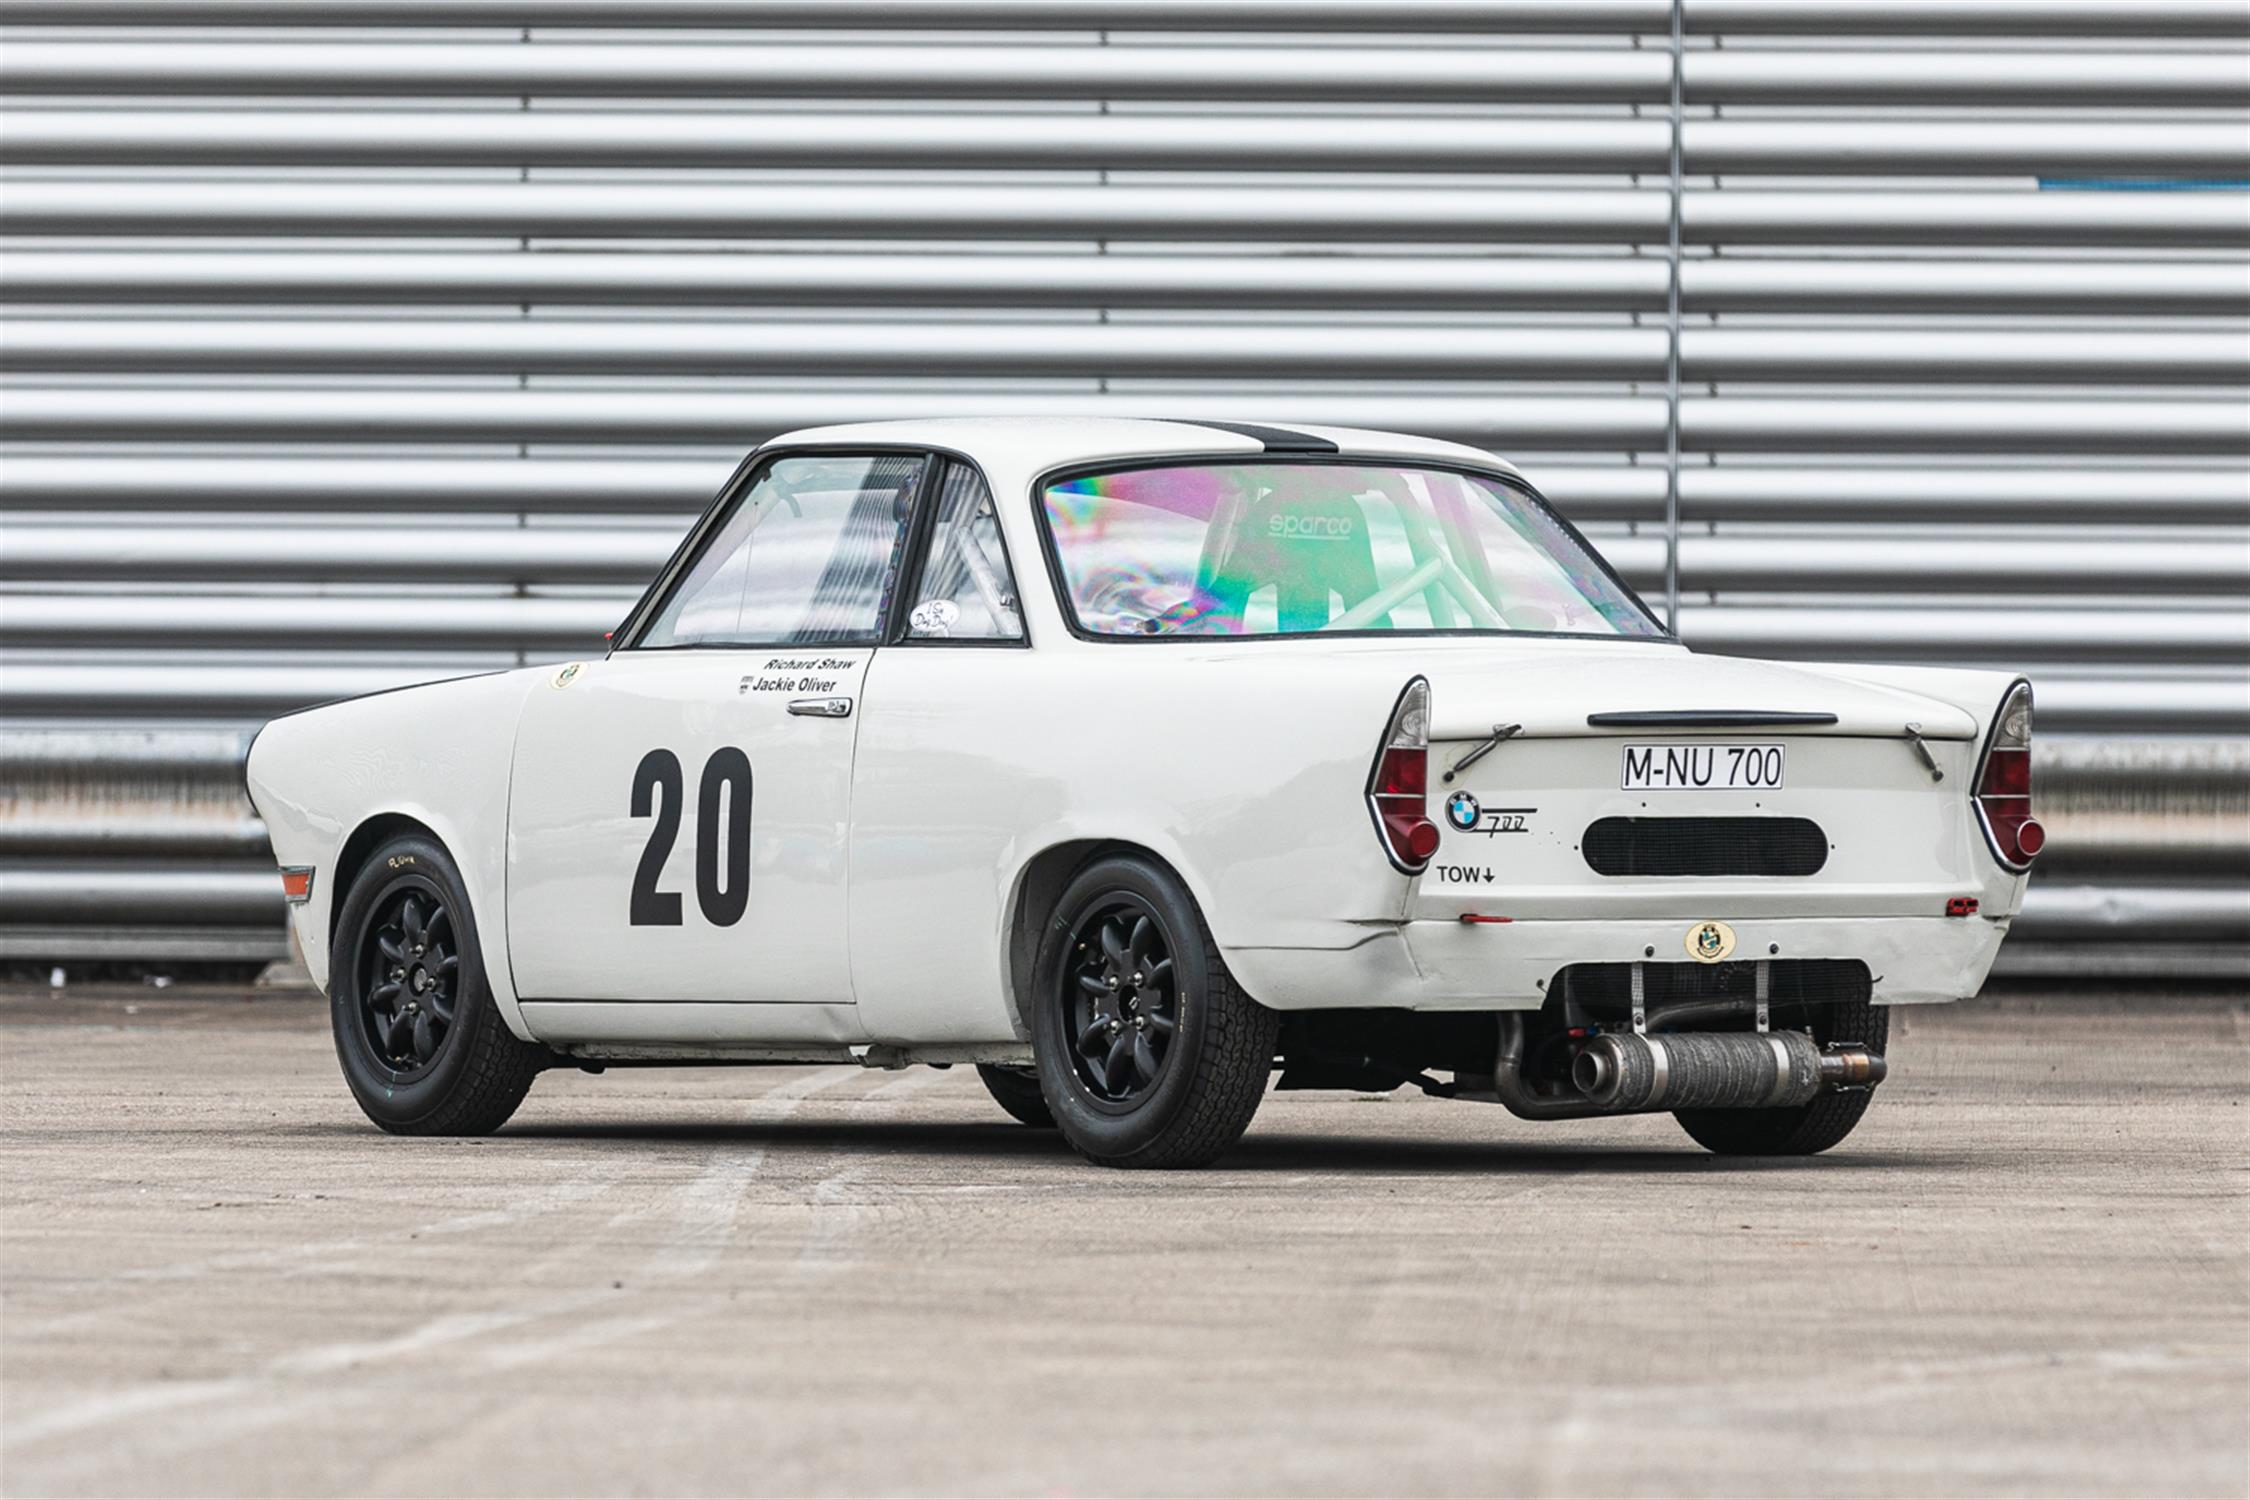 1959 BMW 700 Coupe - Image 5 of 10